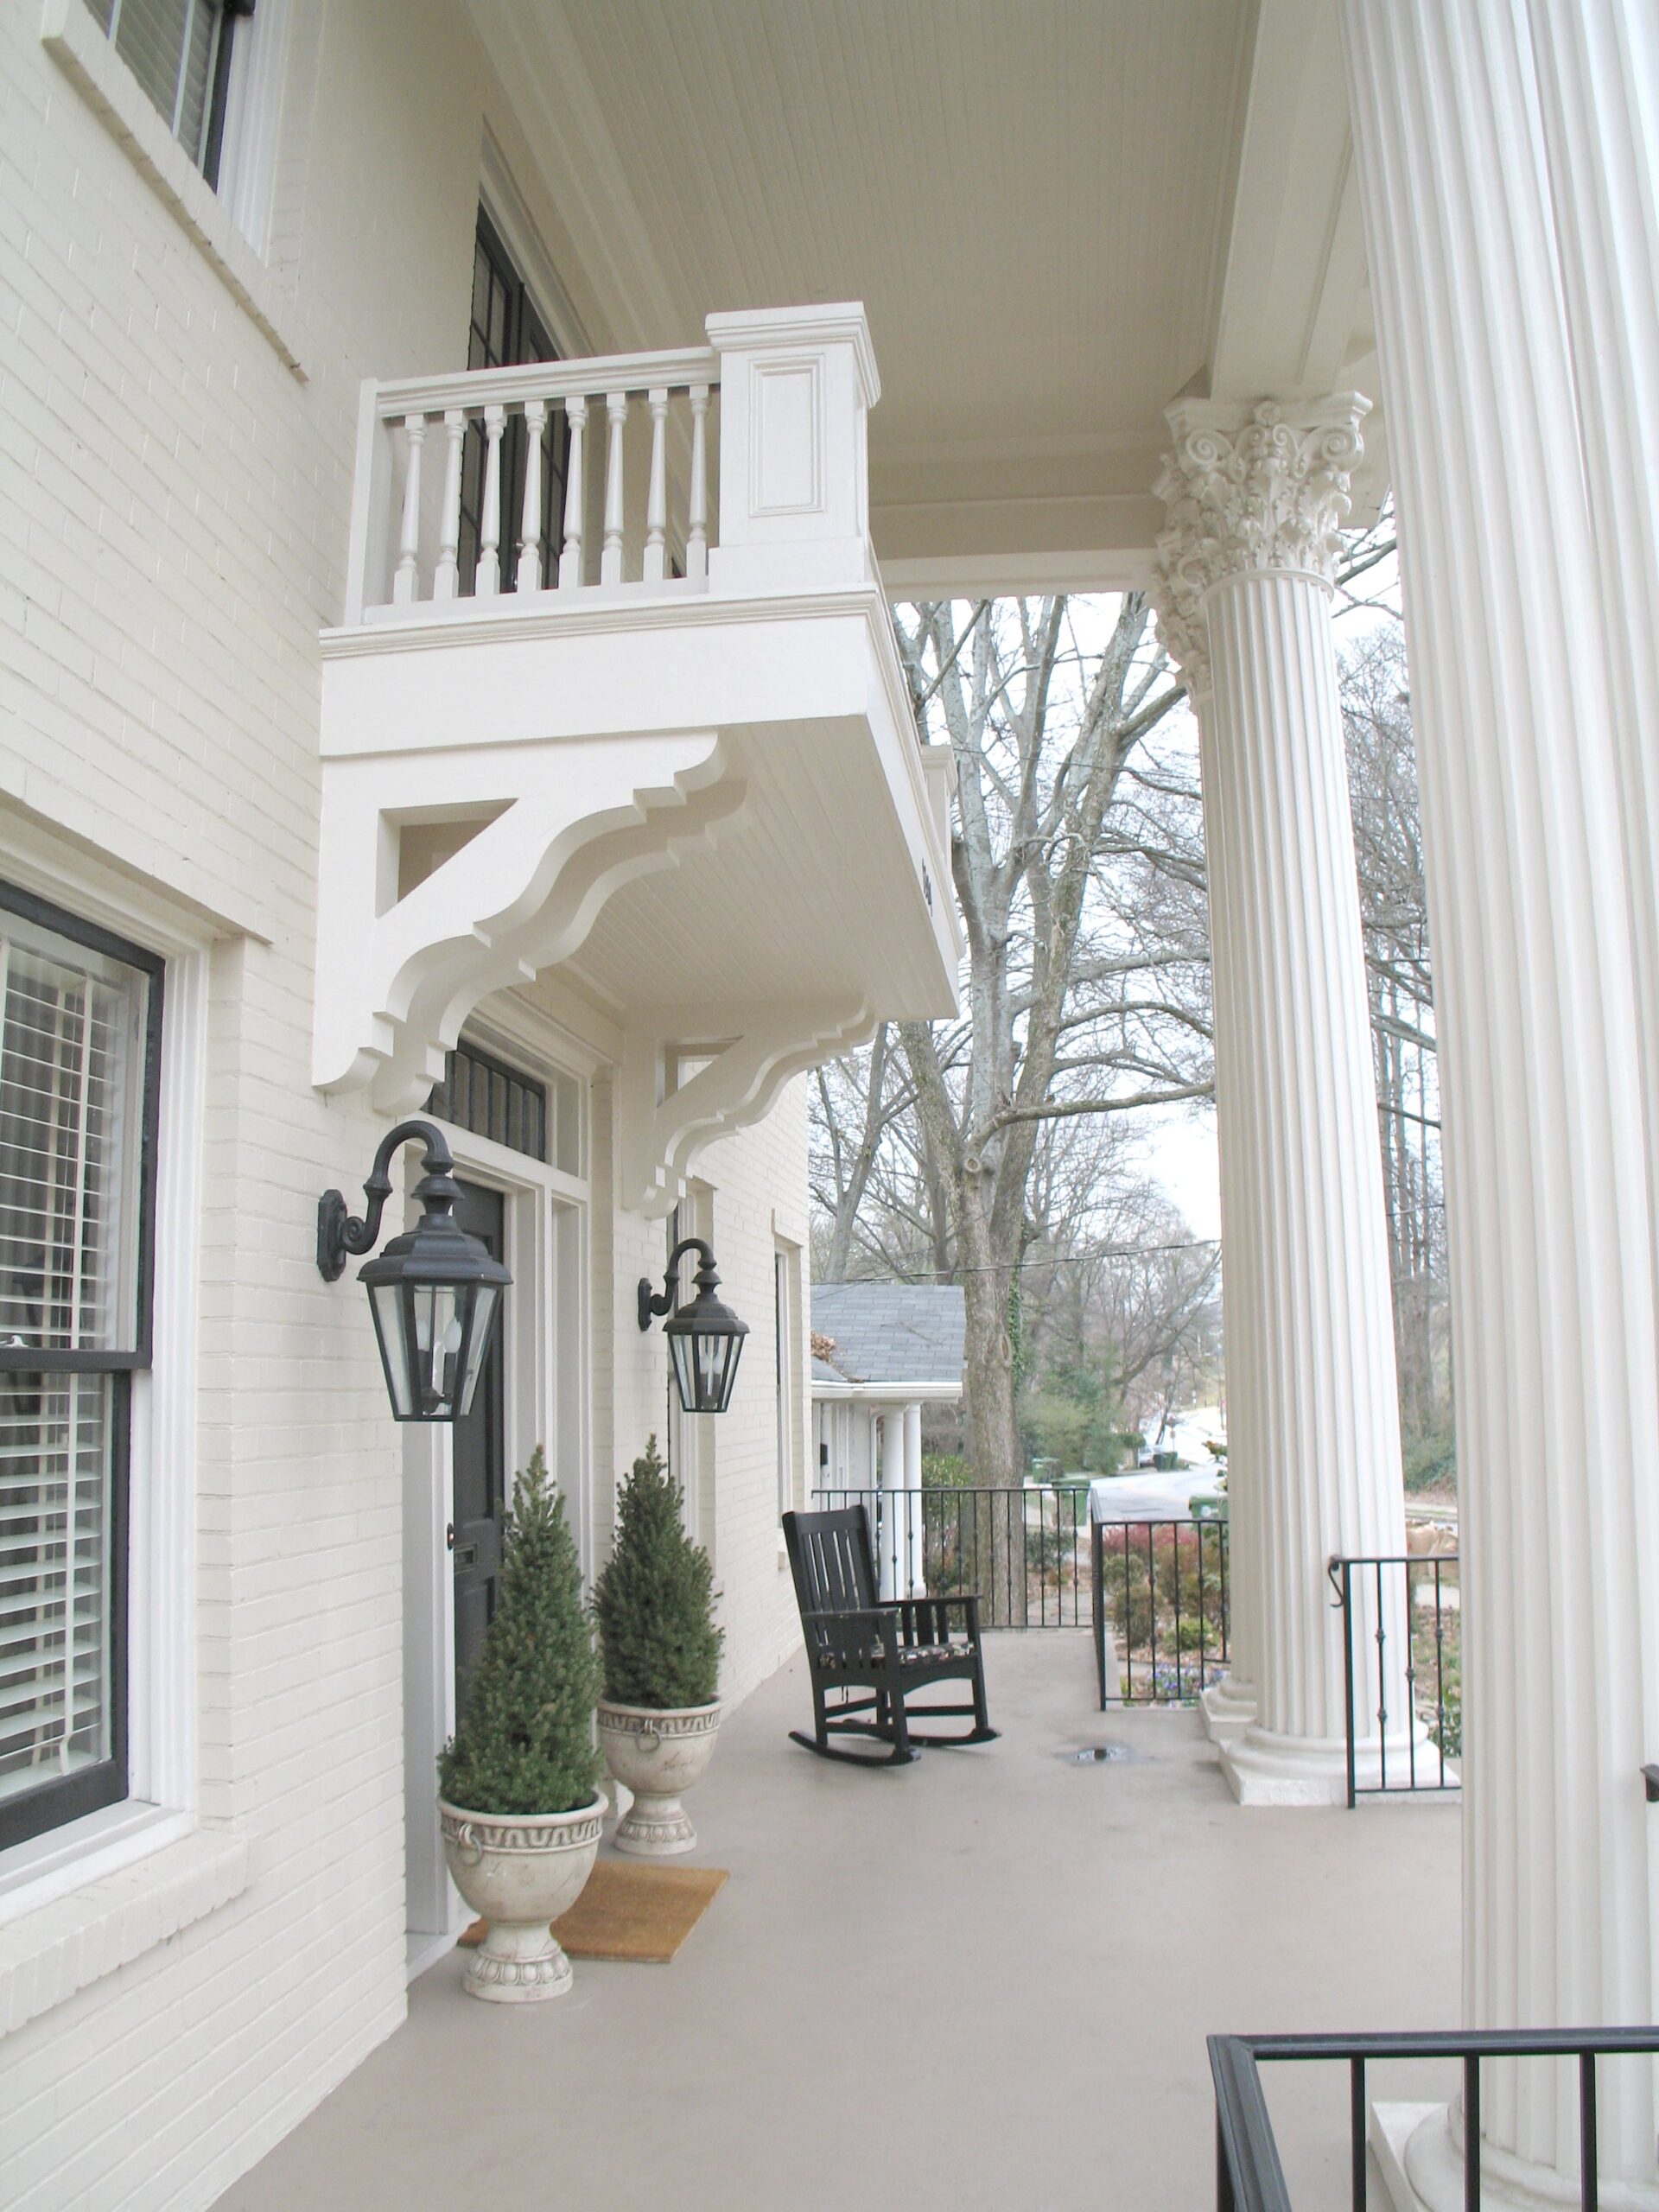 Balcony at Candler Park Entry Porch